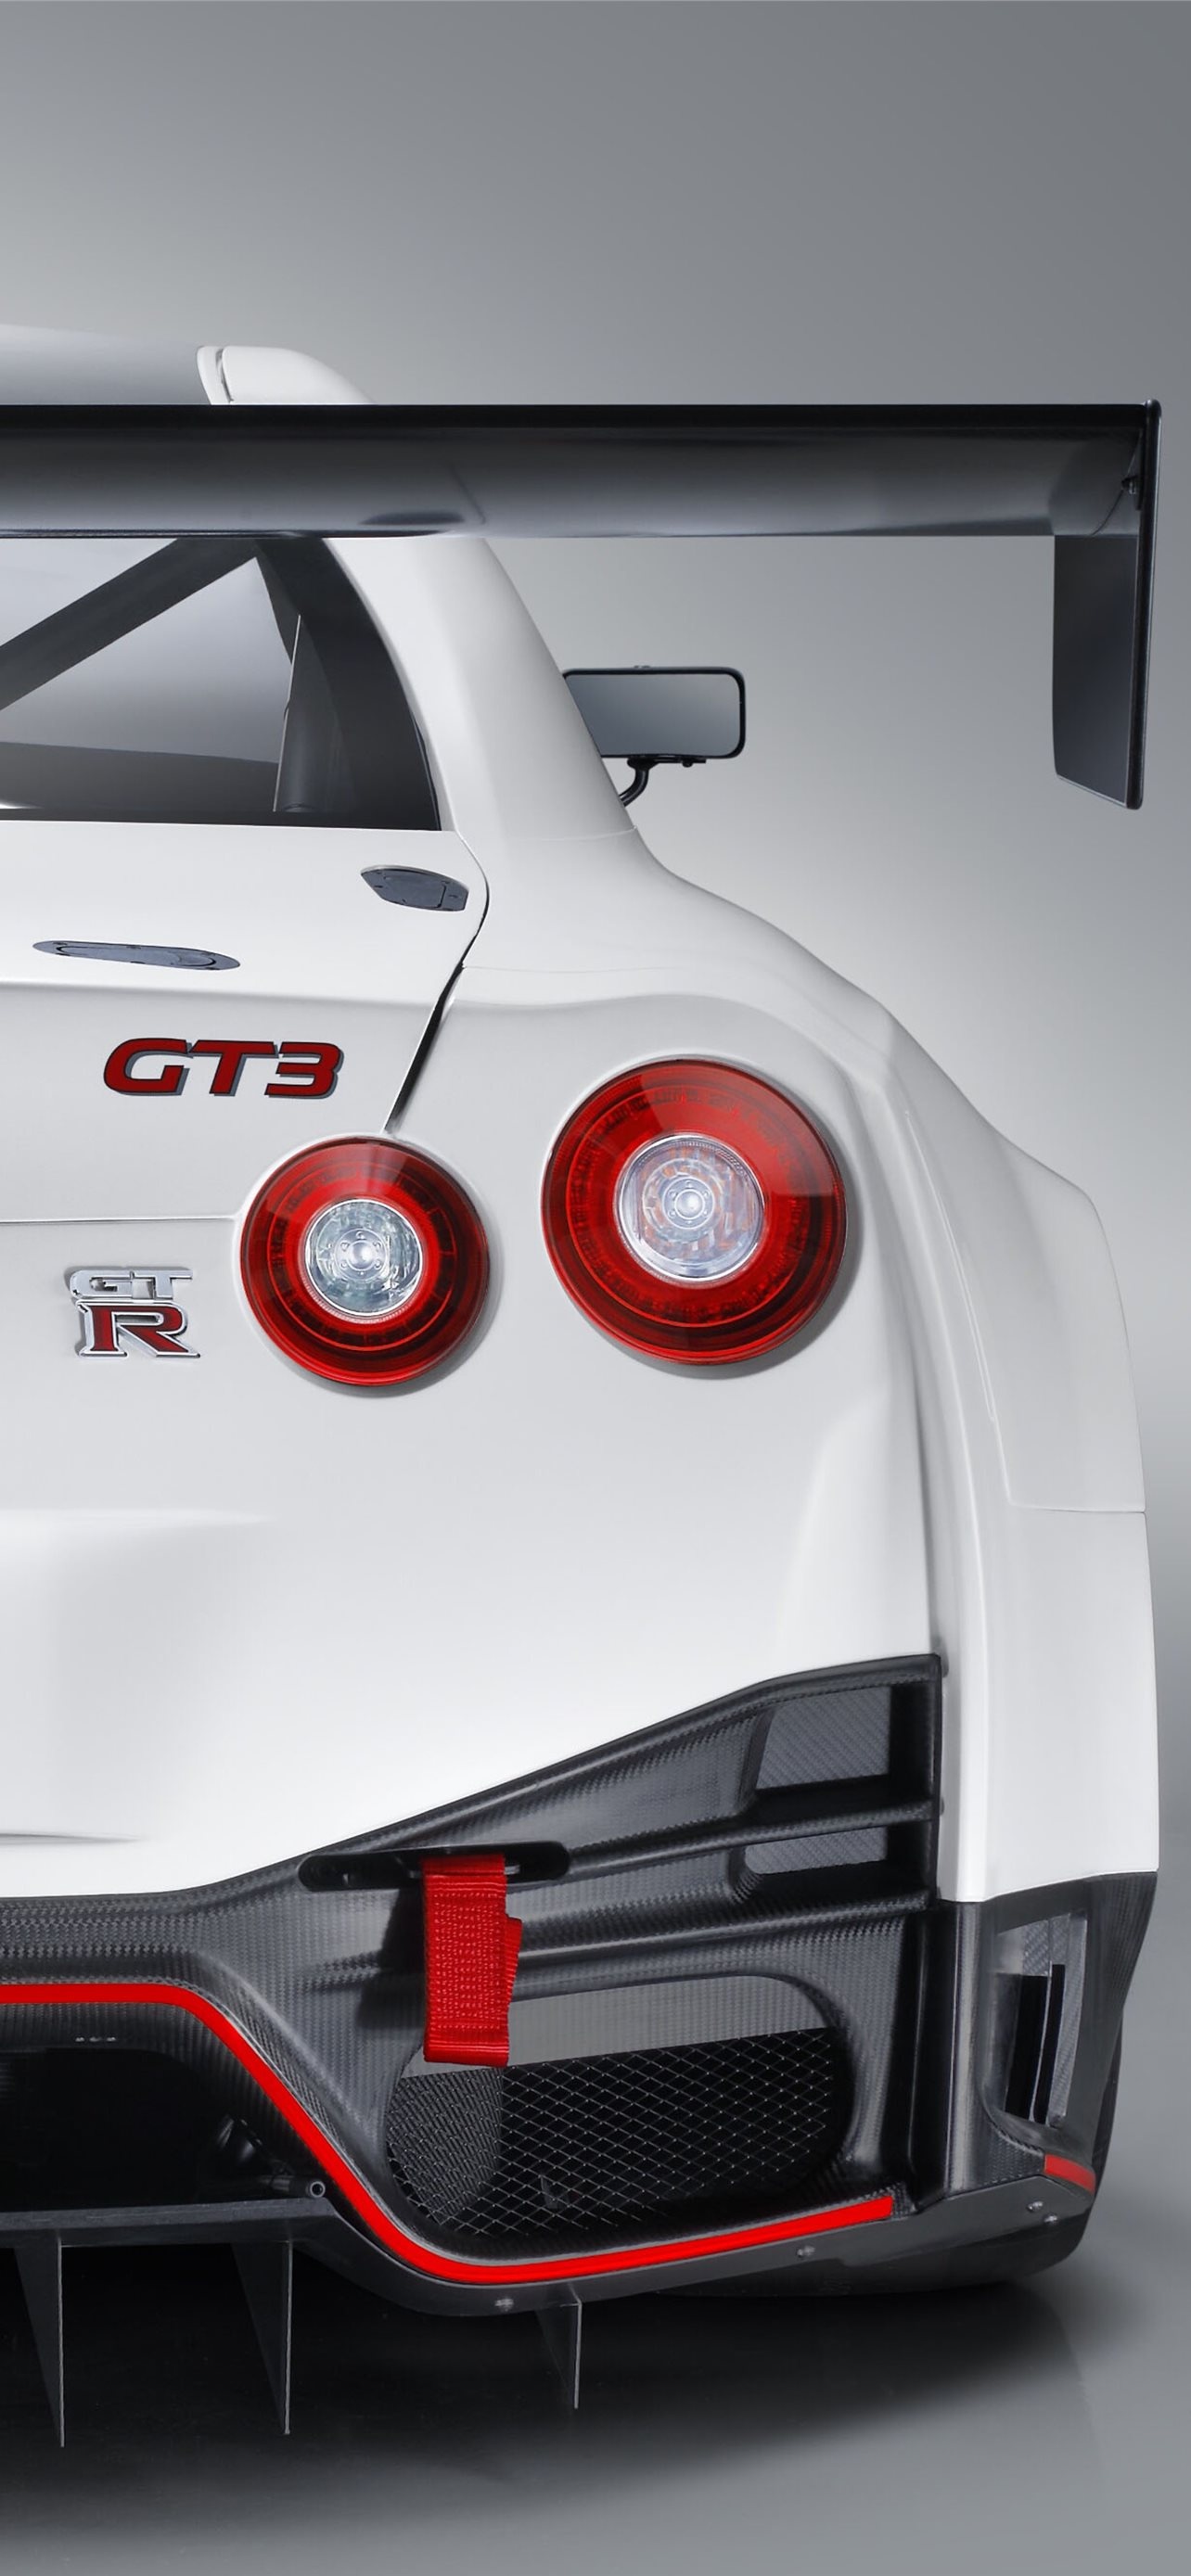 Nissan GT-R, Nismo power, iPhone charm, Captivating speed, 1290x2780 HD Handy